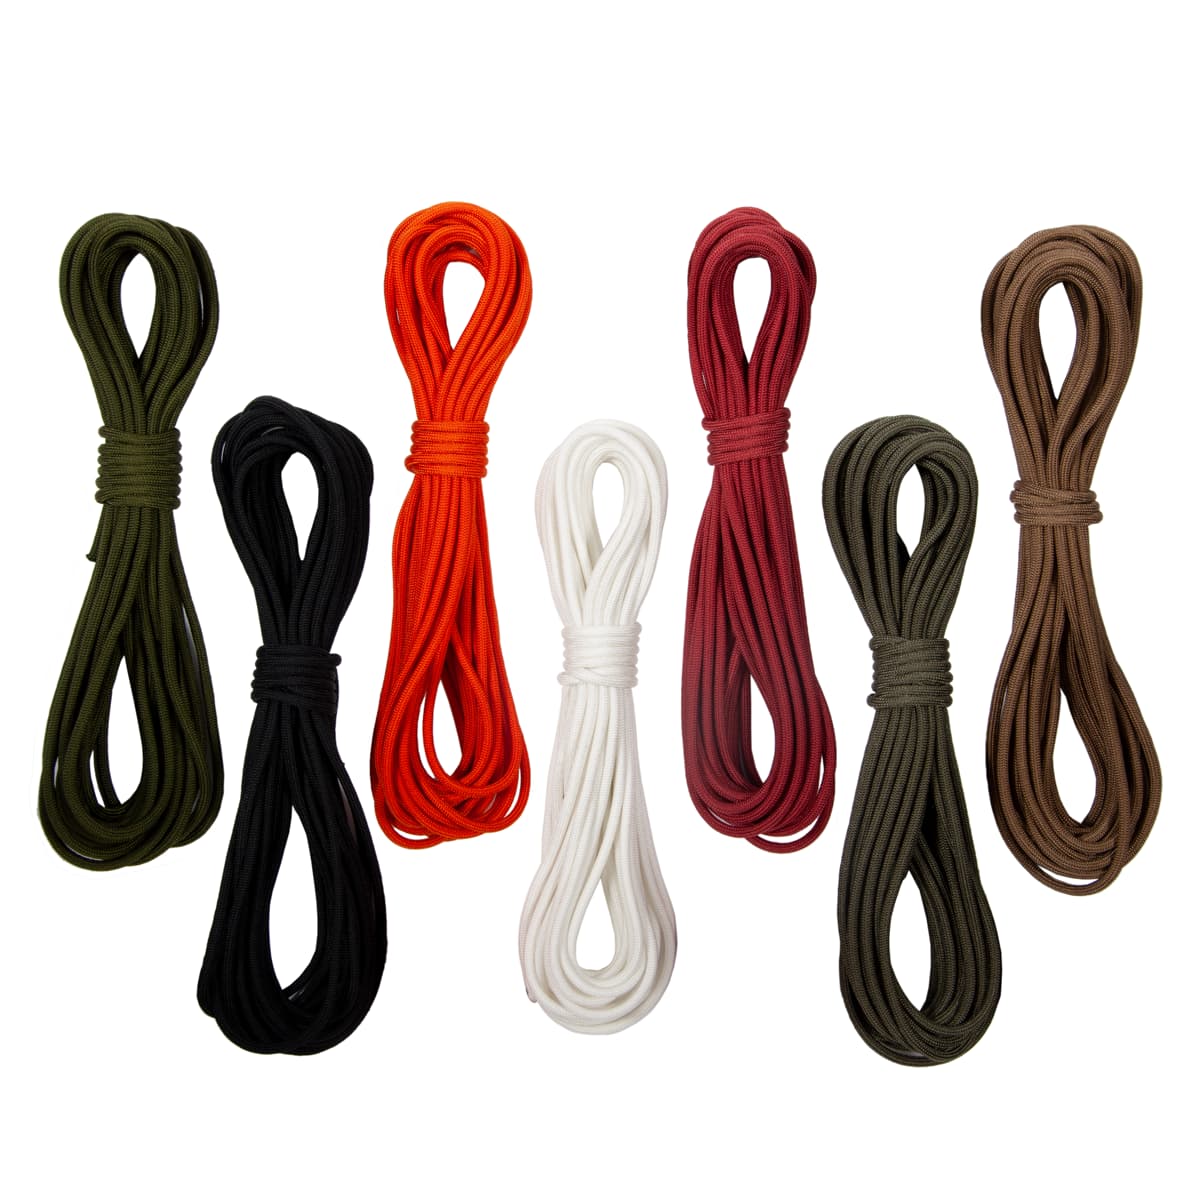 Camo Paracord 550 100FT, Parachute Cord Mil-Spec, 100% Nylon Rope in  Survival Gear and Equipment, Heavy Duty Rope for Bracelet, Leashes,  Lanyards and